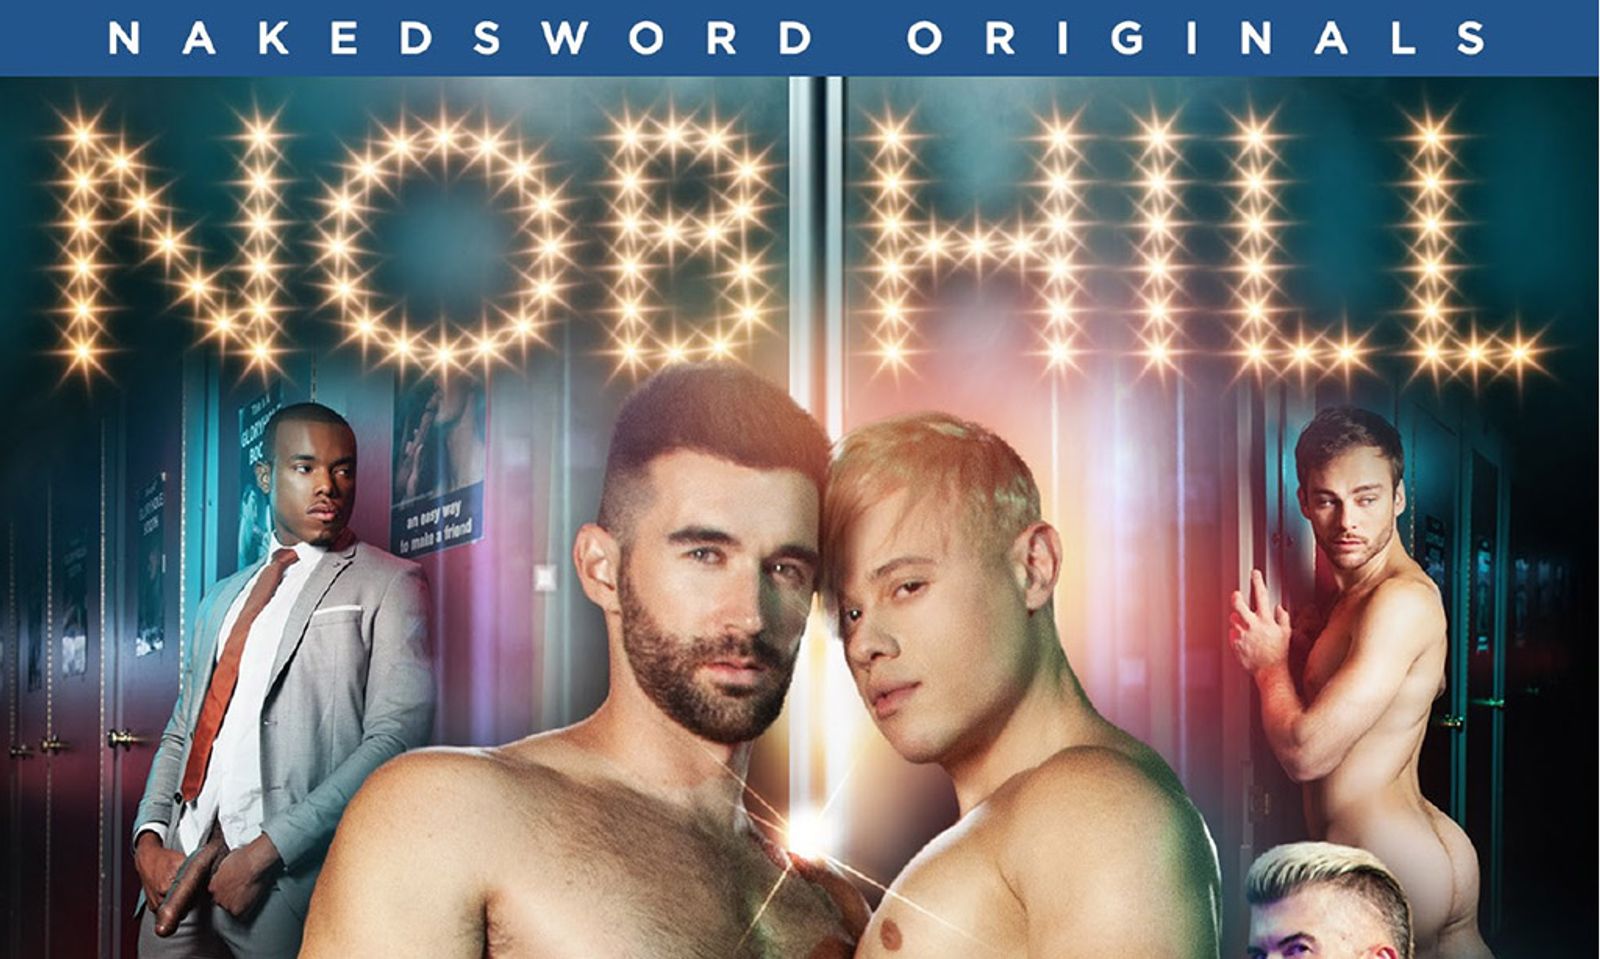 NakedSword's 'Nob Hill' Series Finale Features Live Sex Show